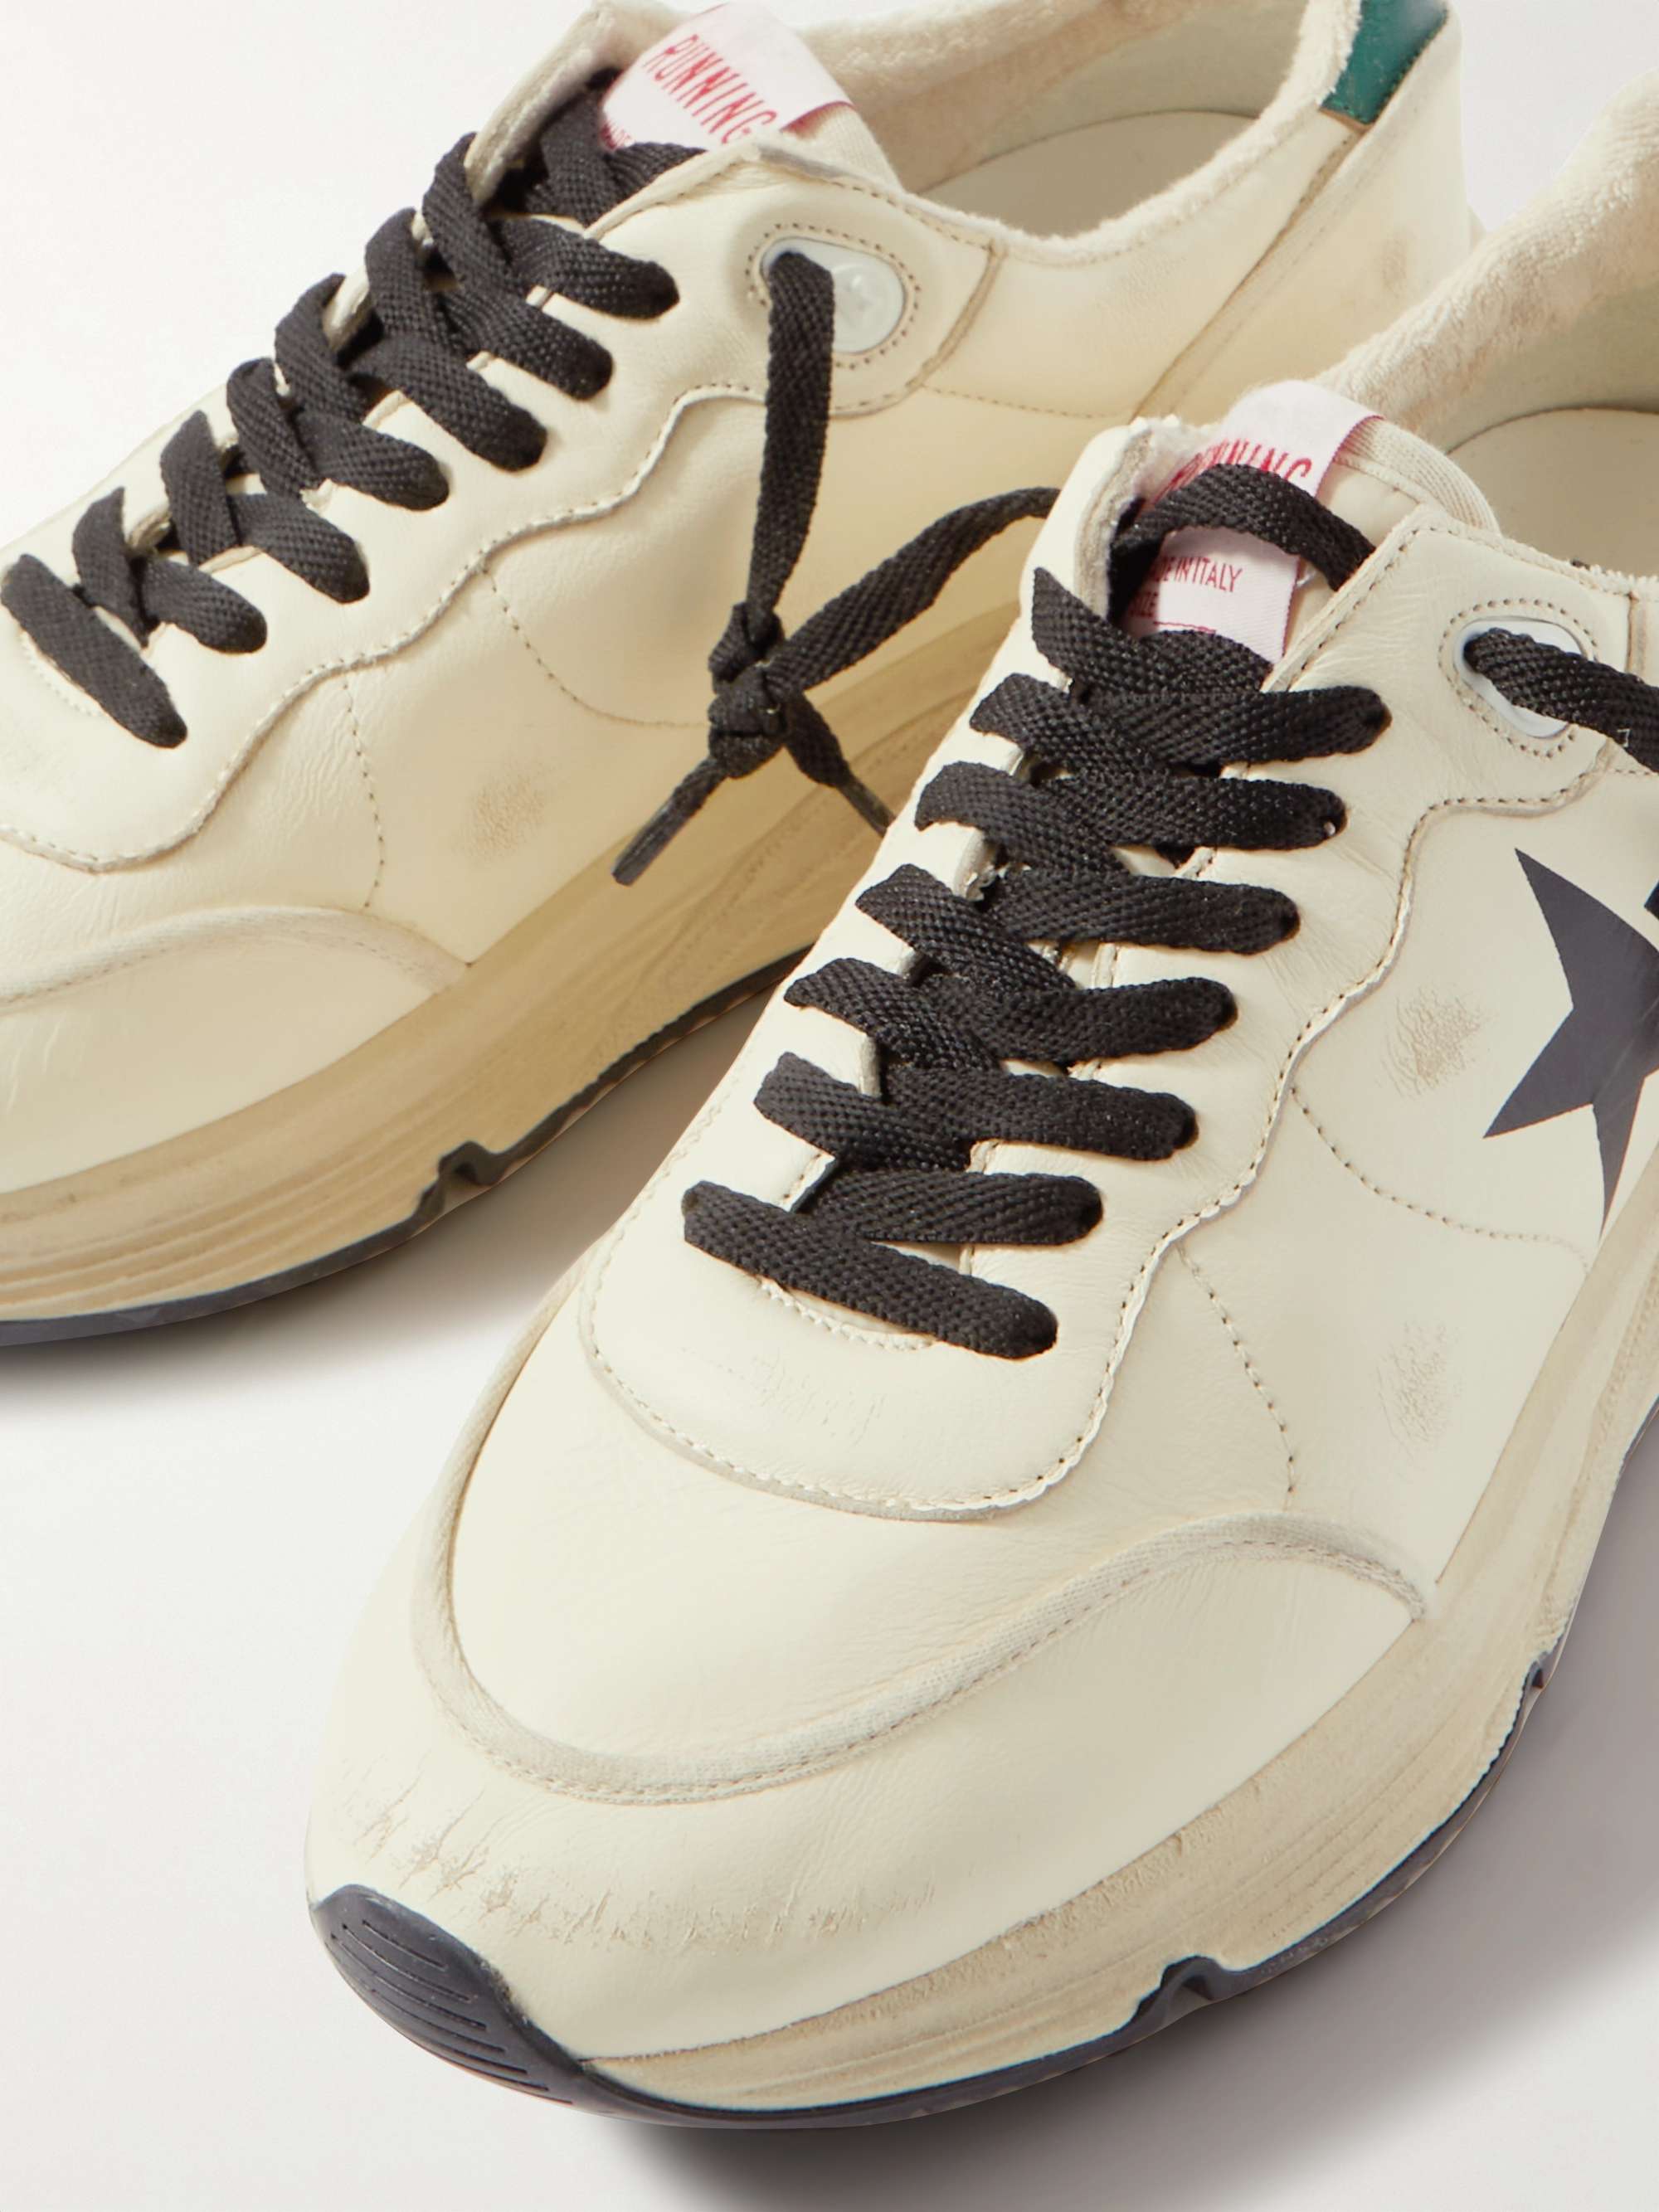 GOLDEN GOOSE Running Sole Distressed Leather Sneakers